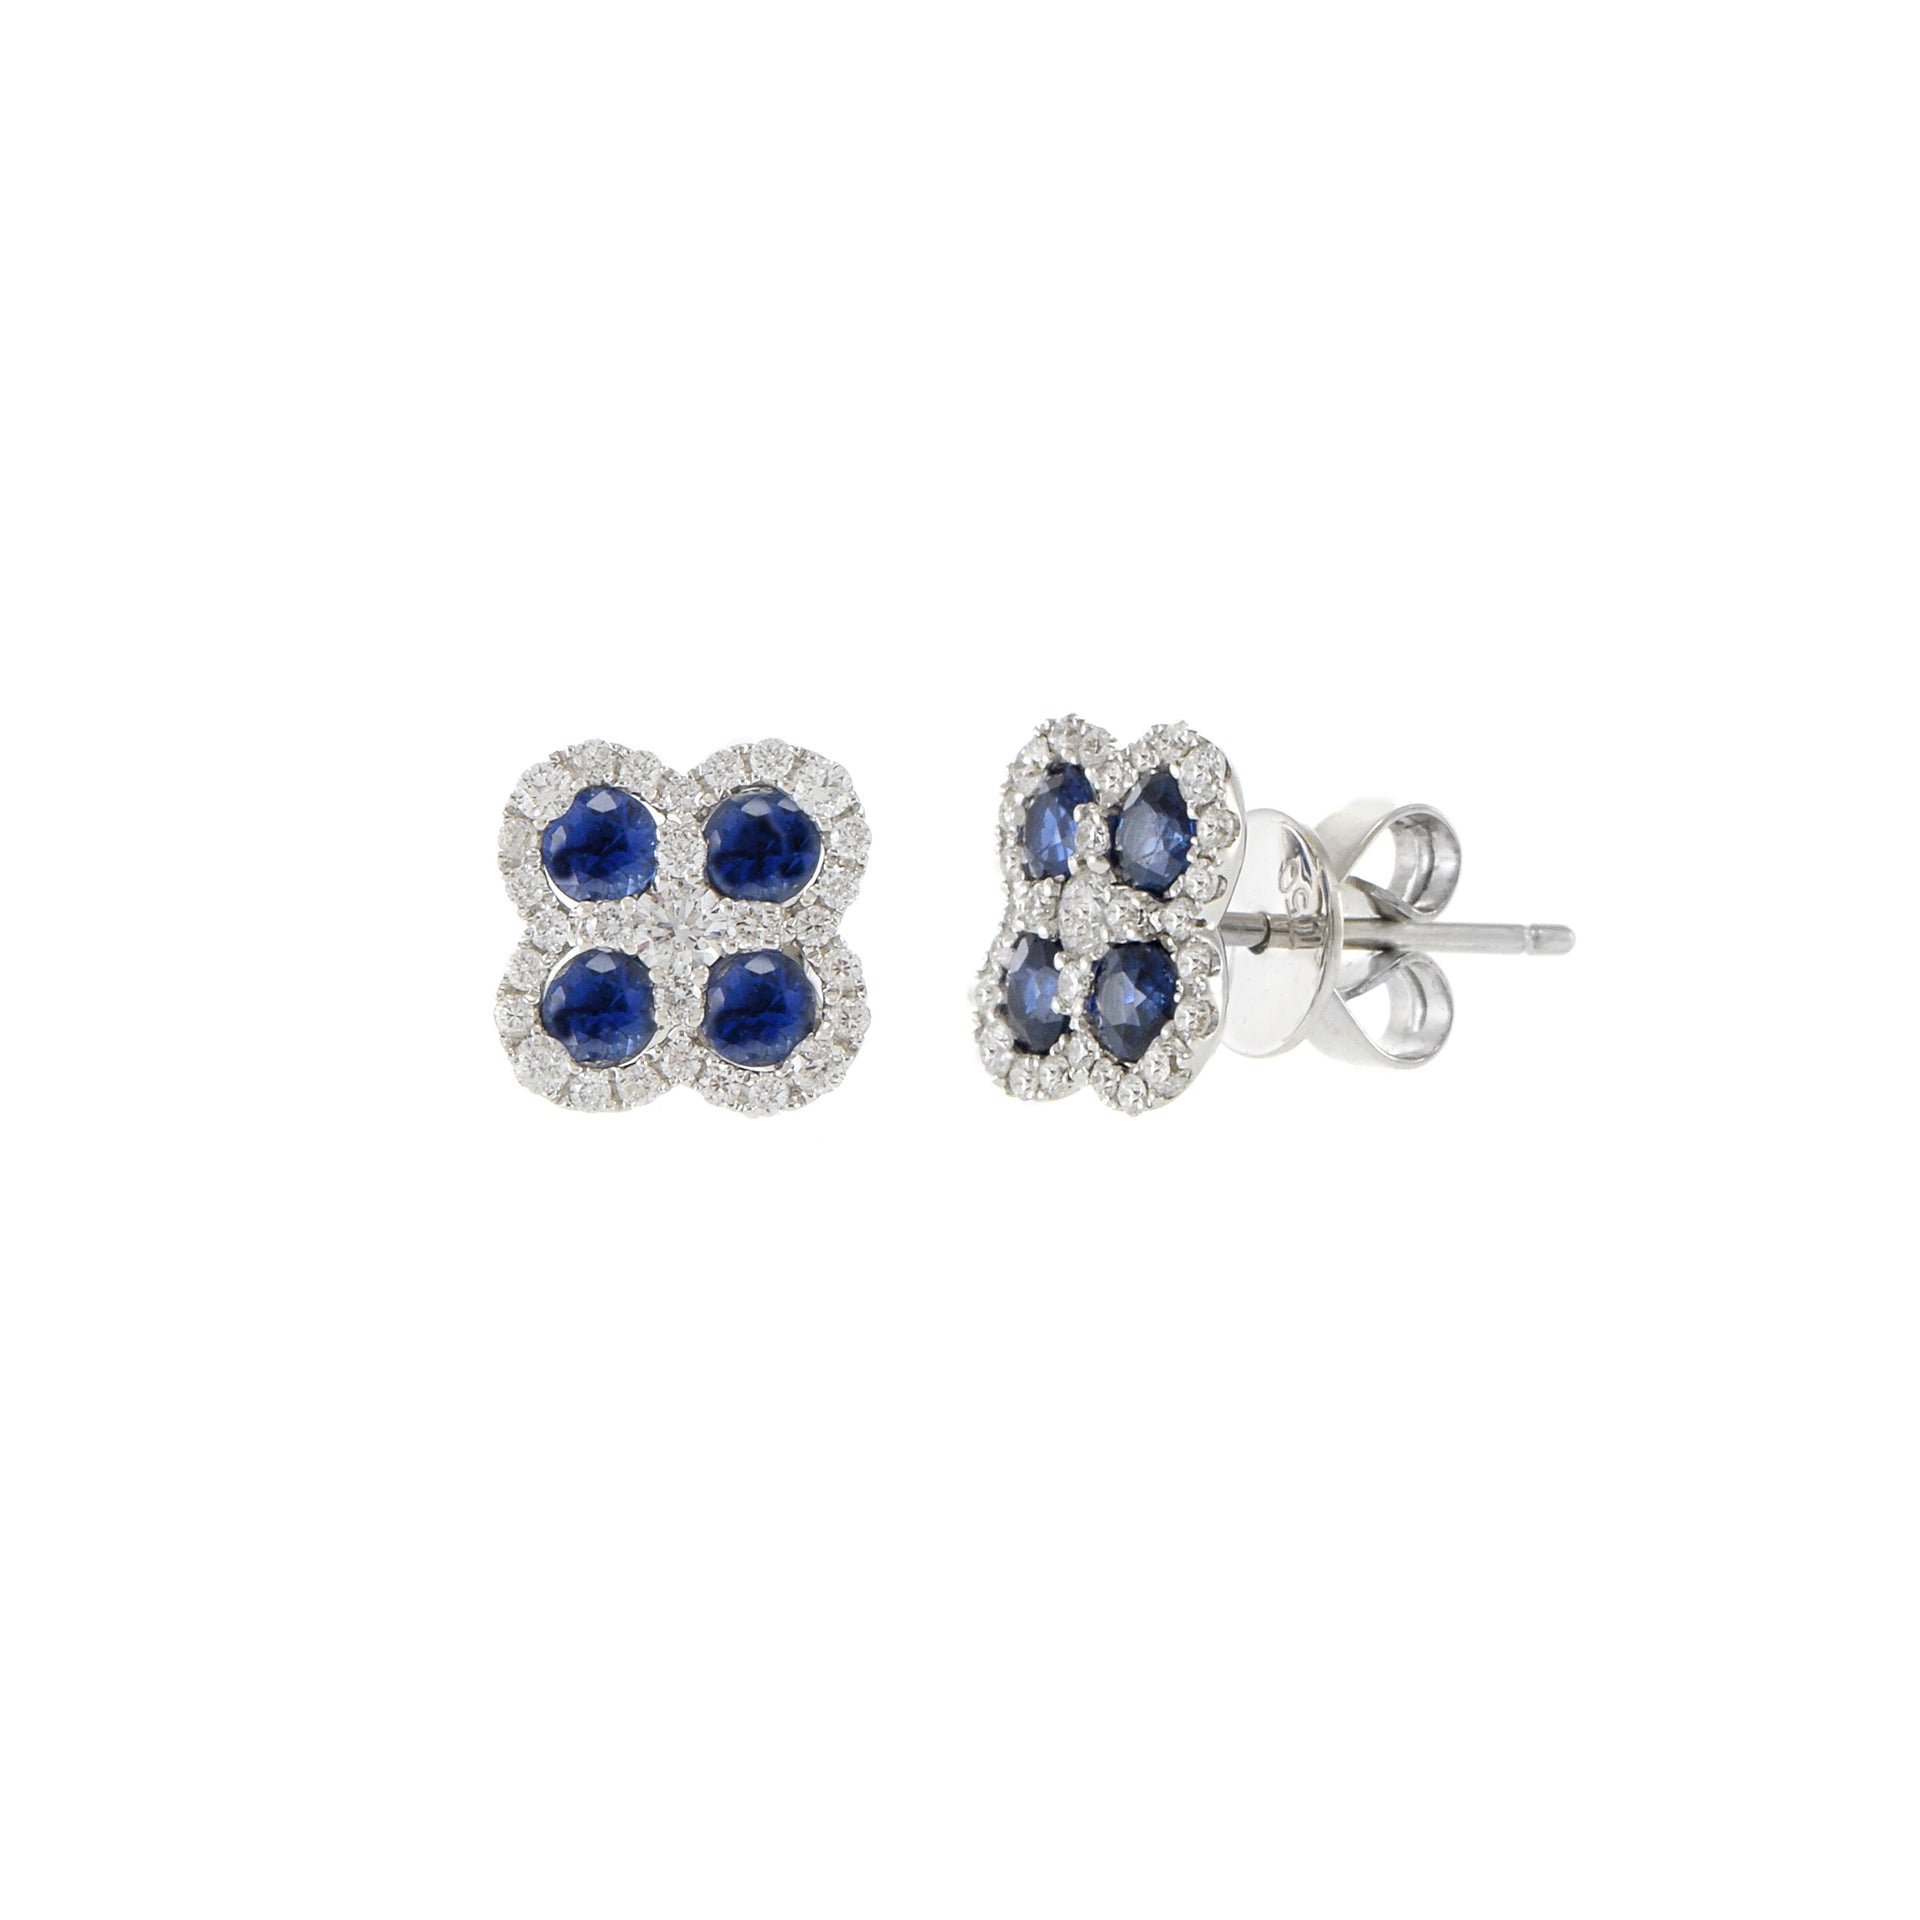 18KT White Gold Round Cut Blue Sapphire And Diamond Clover Earrings